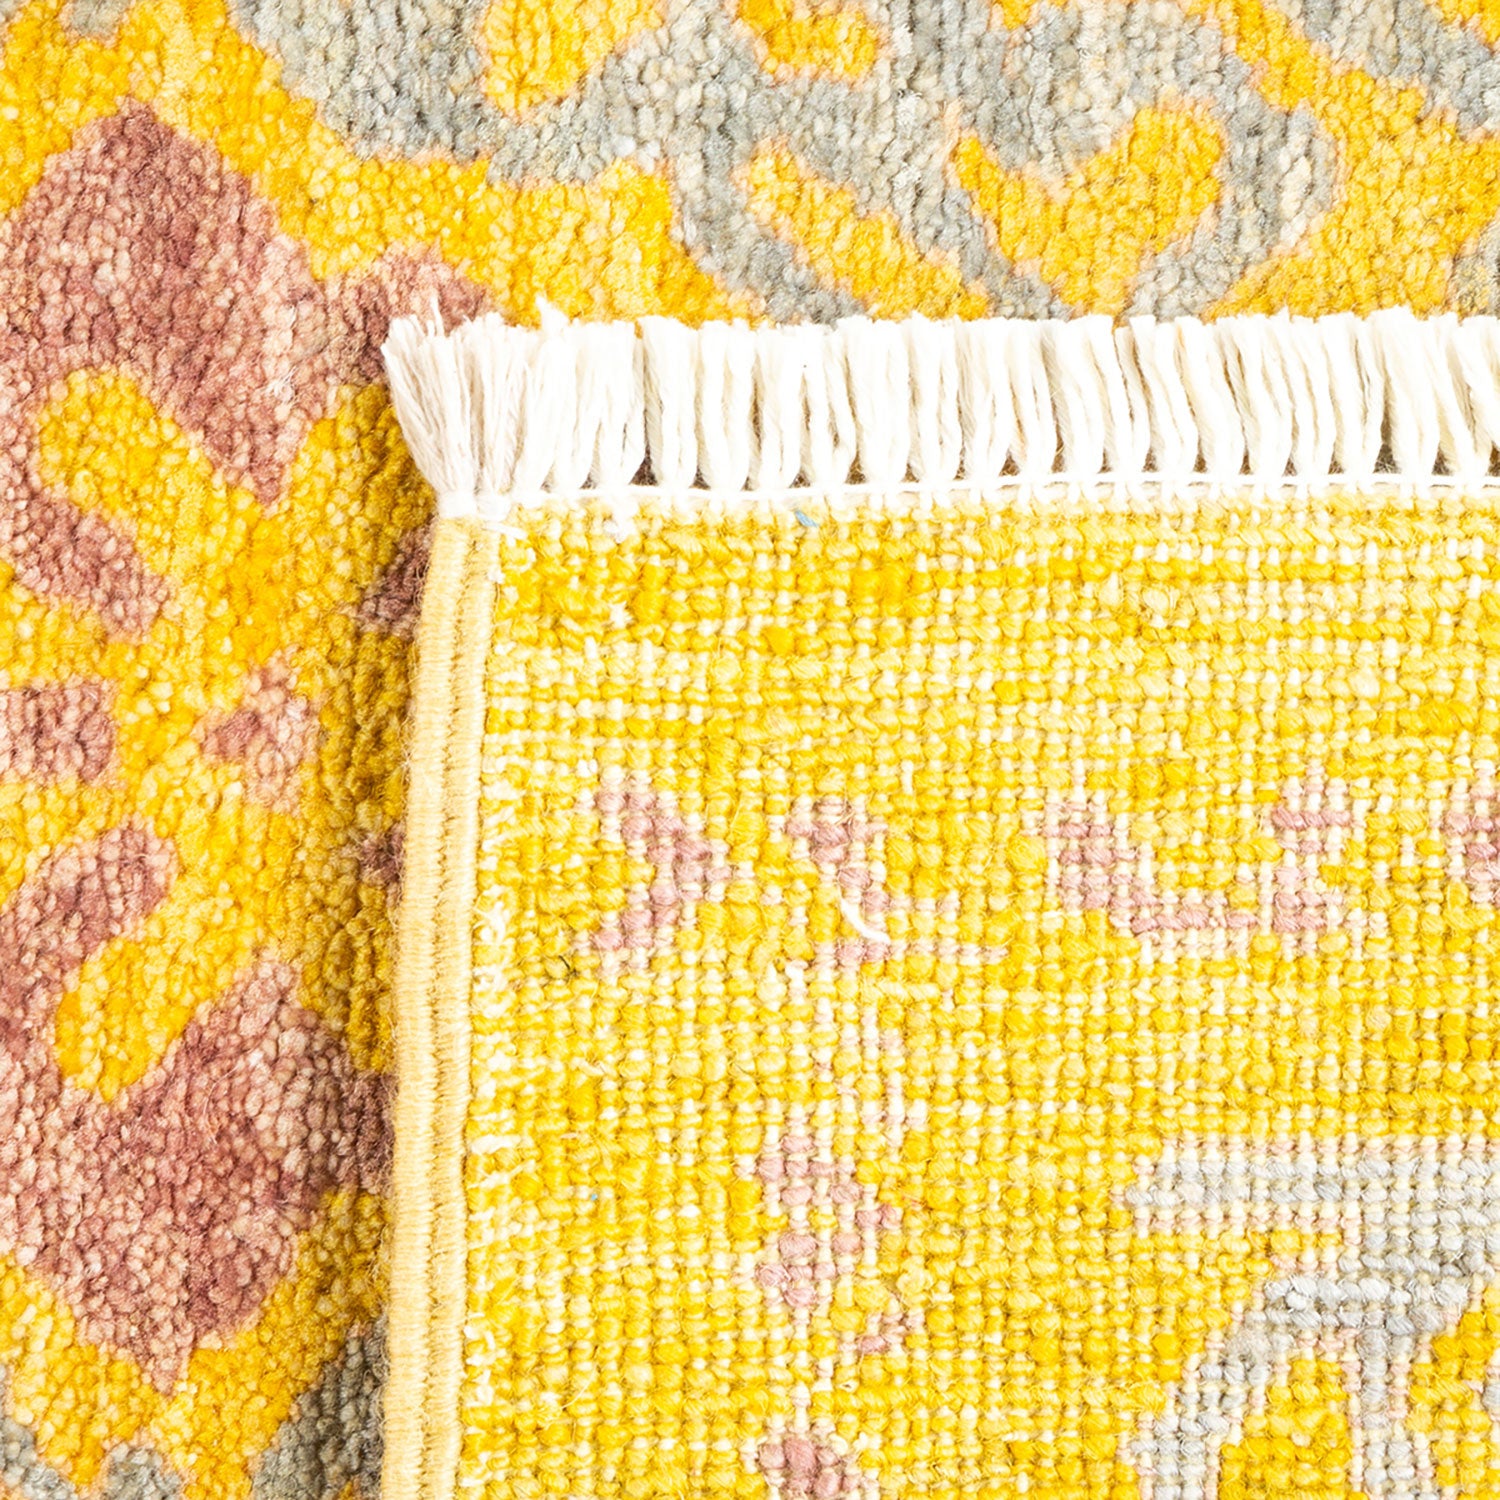 Close-up of a vibrant yellow rug with textured patterns